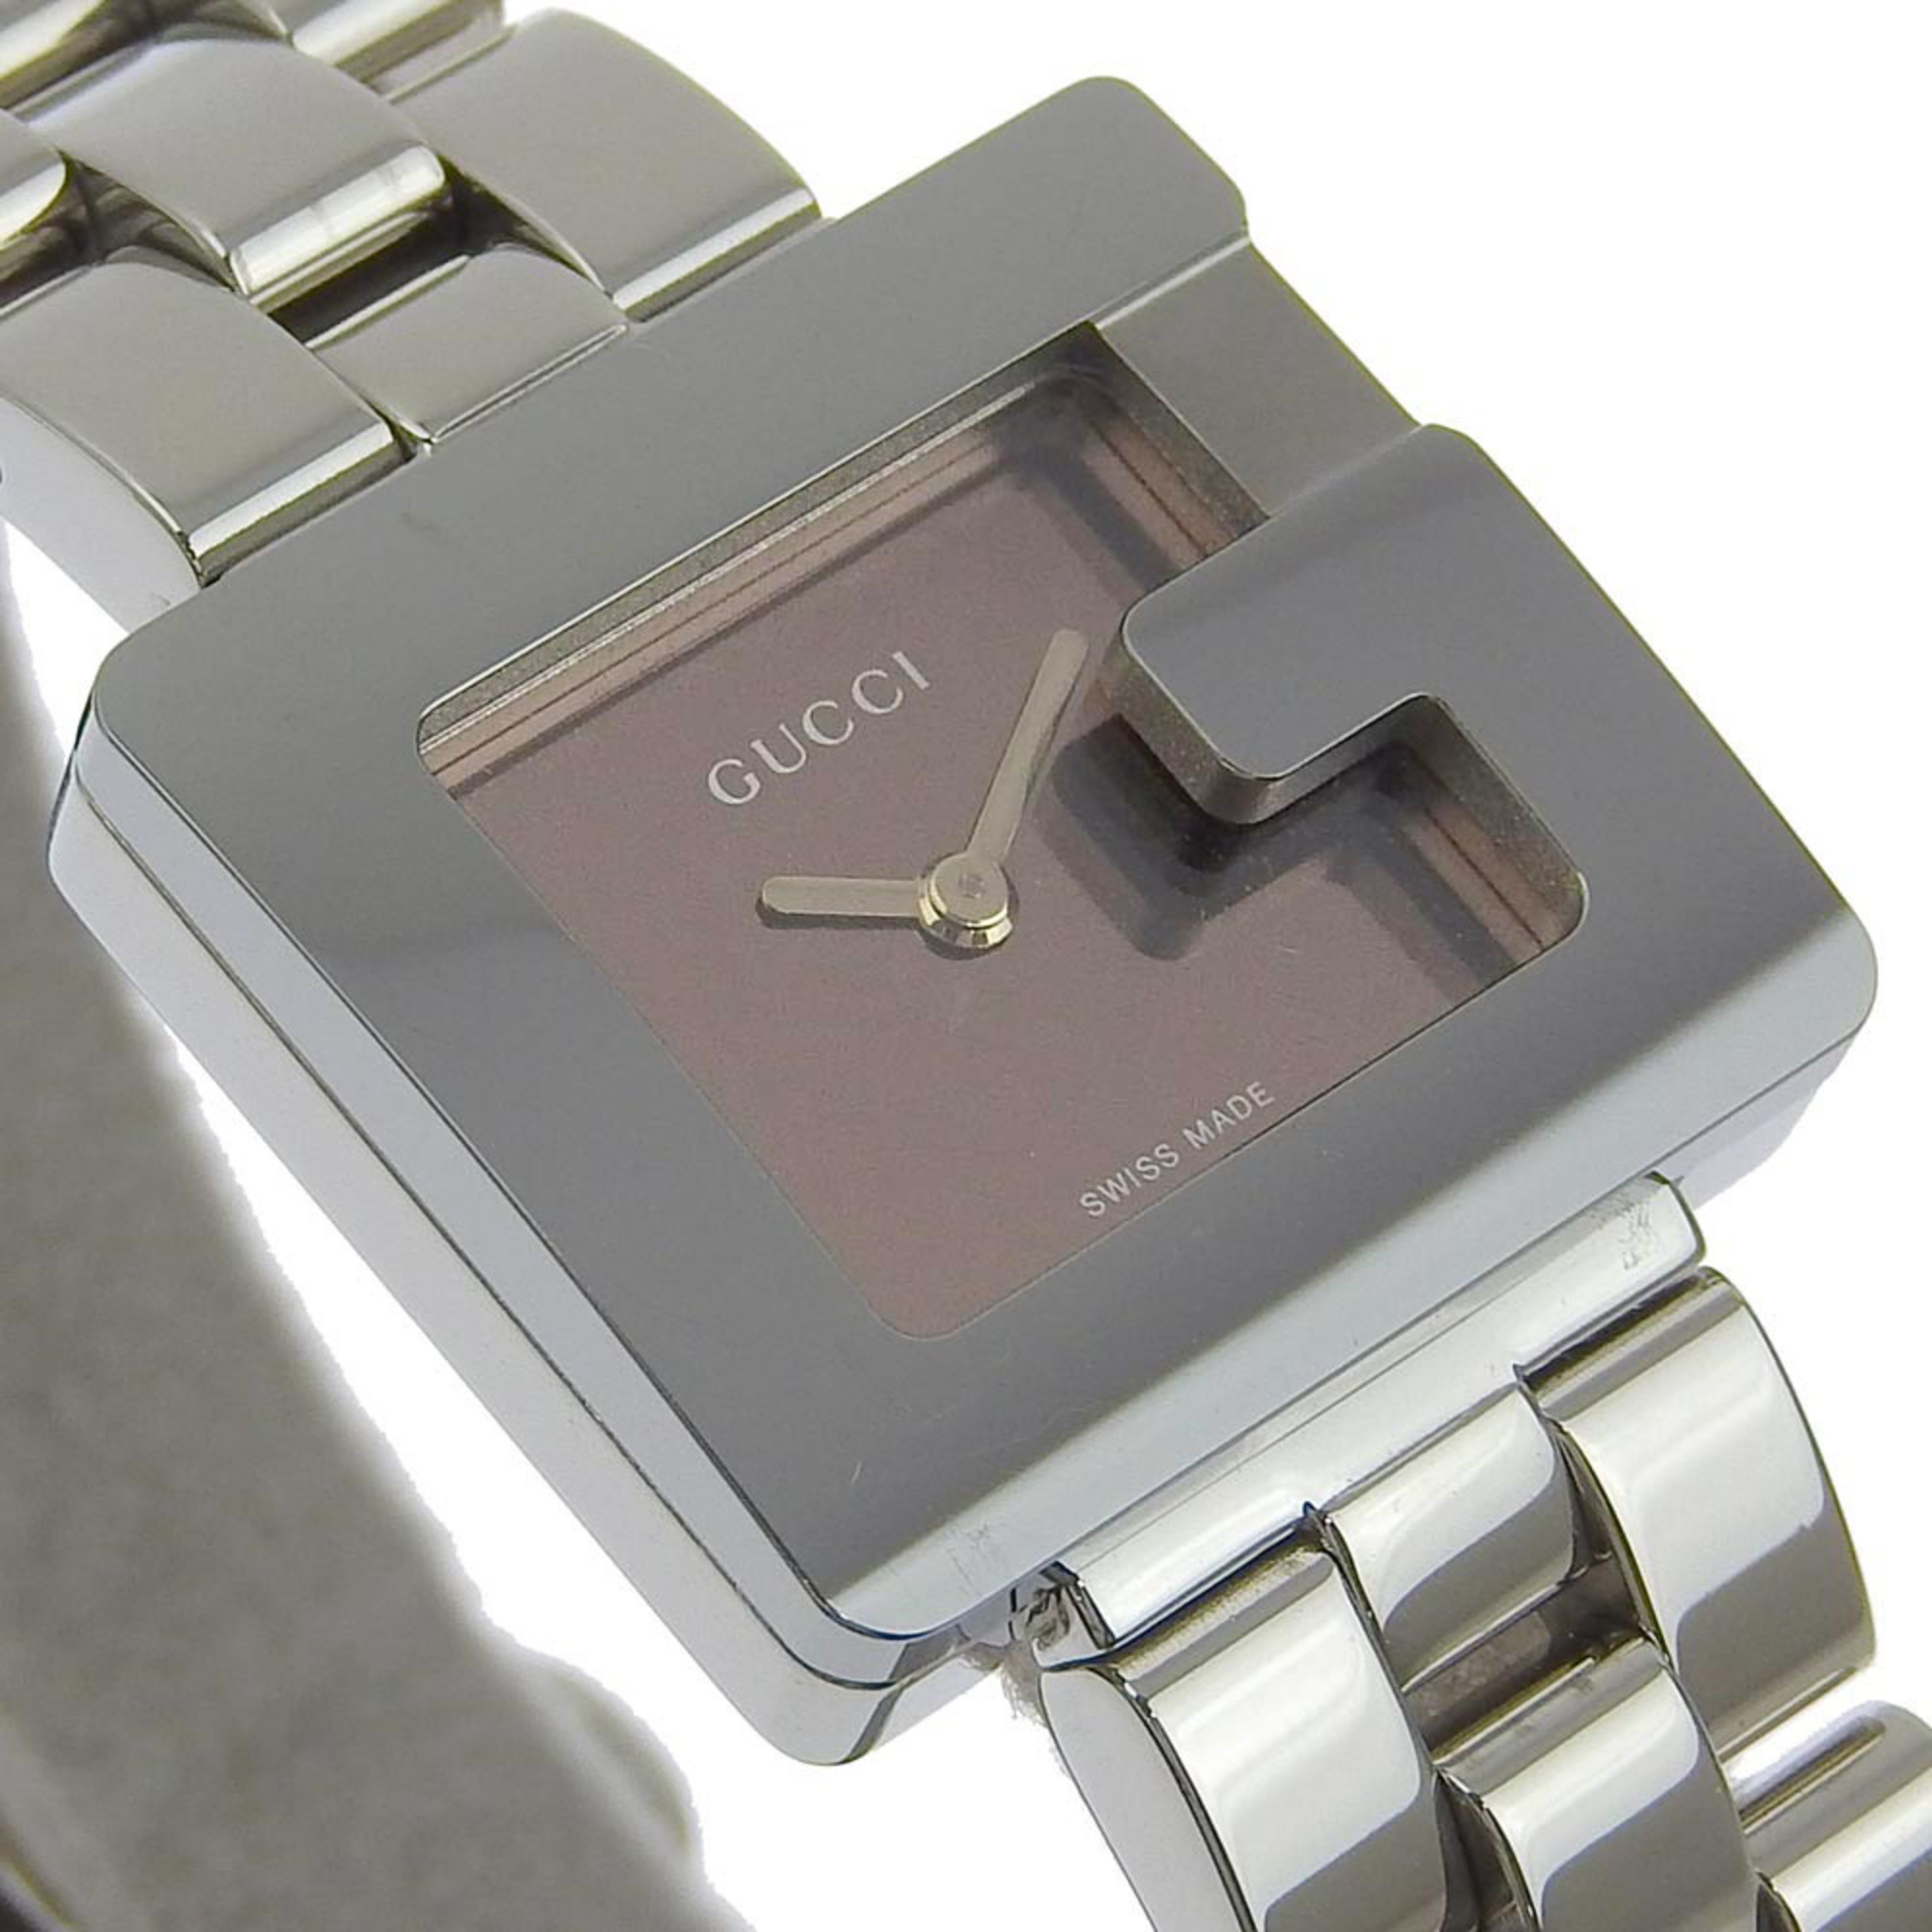 GUCCI Gucci G watch wristwatch 3600L stainless steel silver quartz analog display ladies brown dial